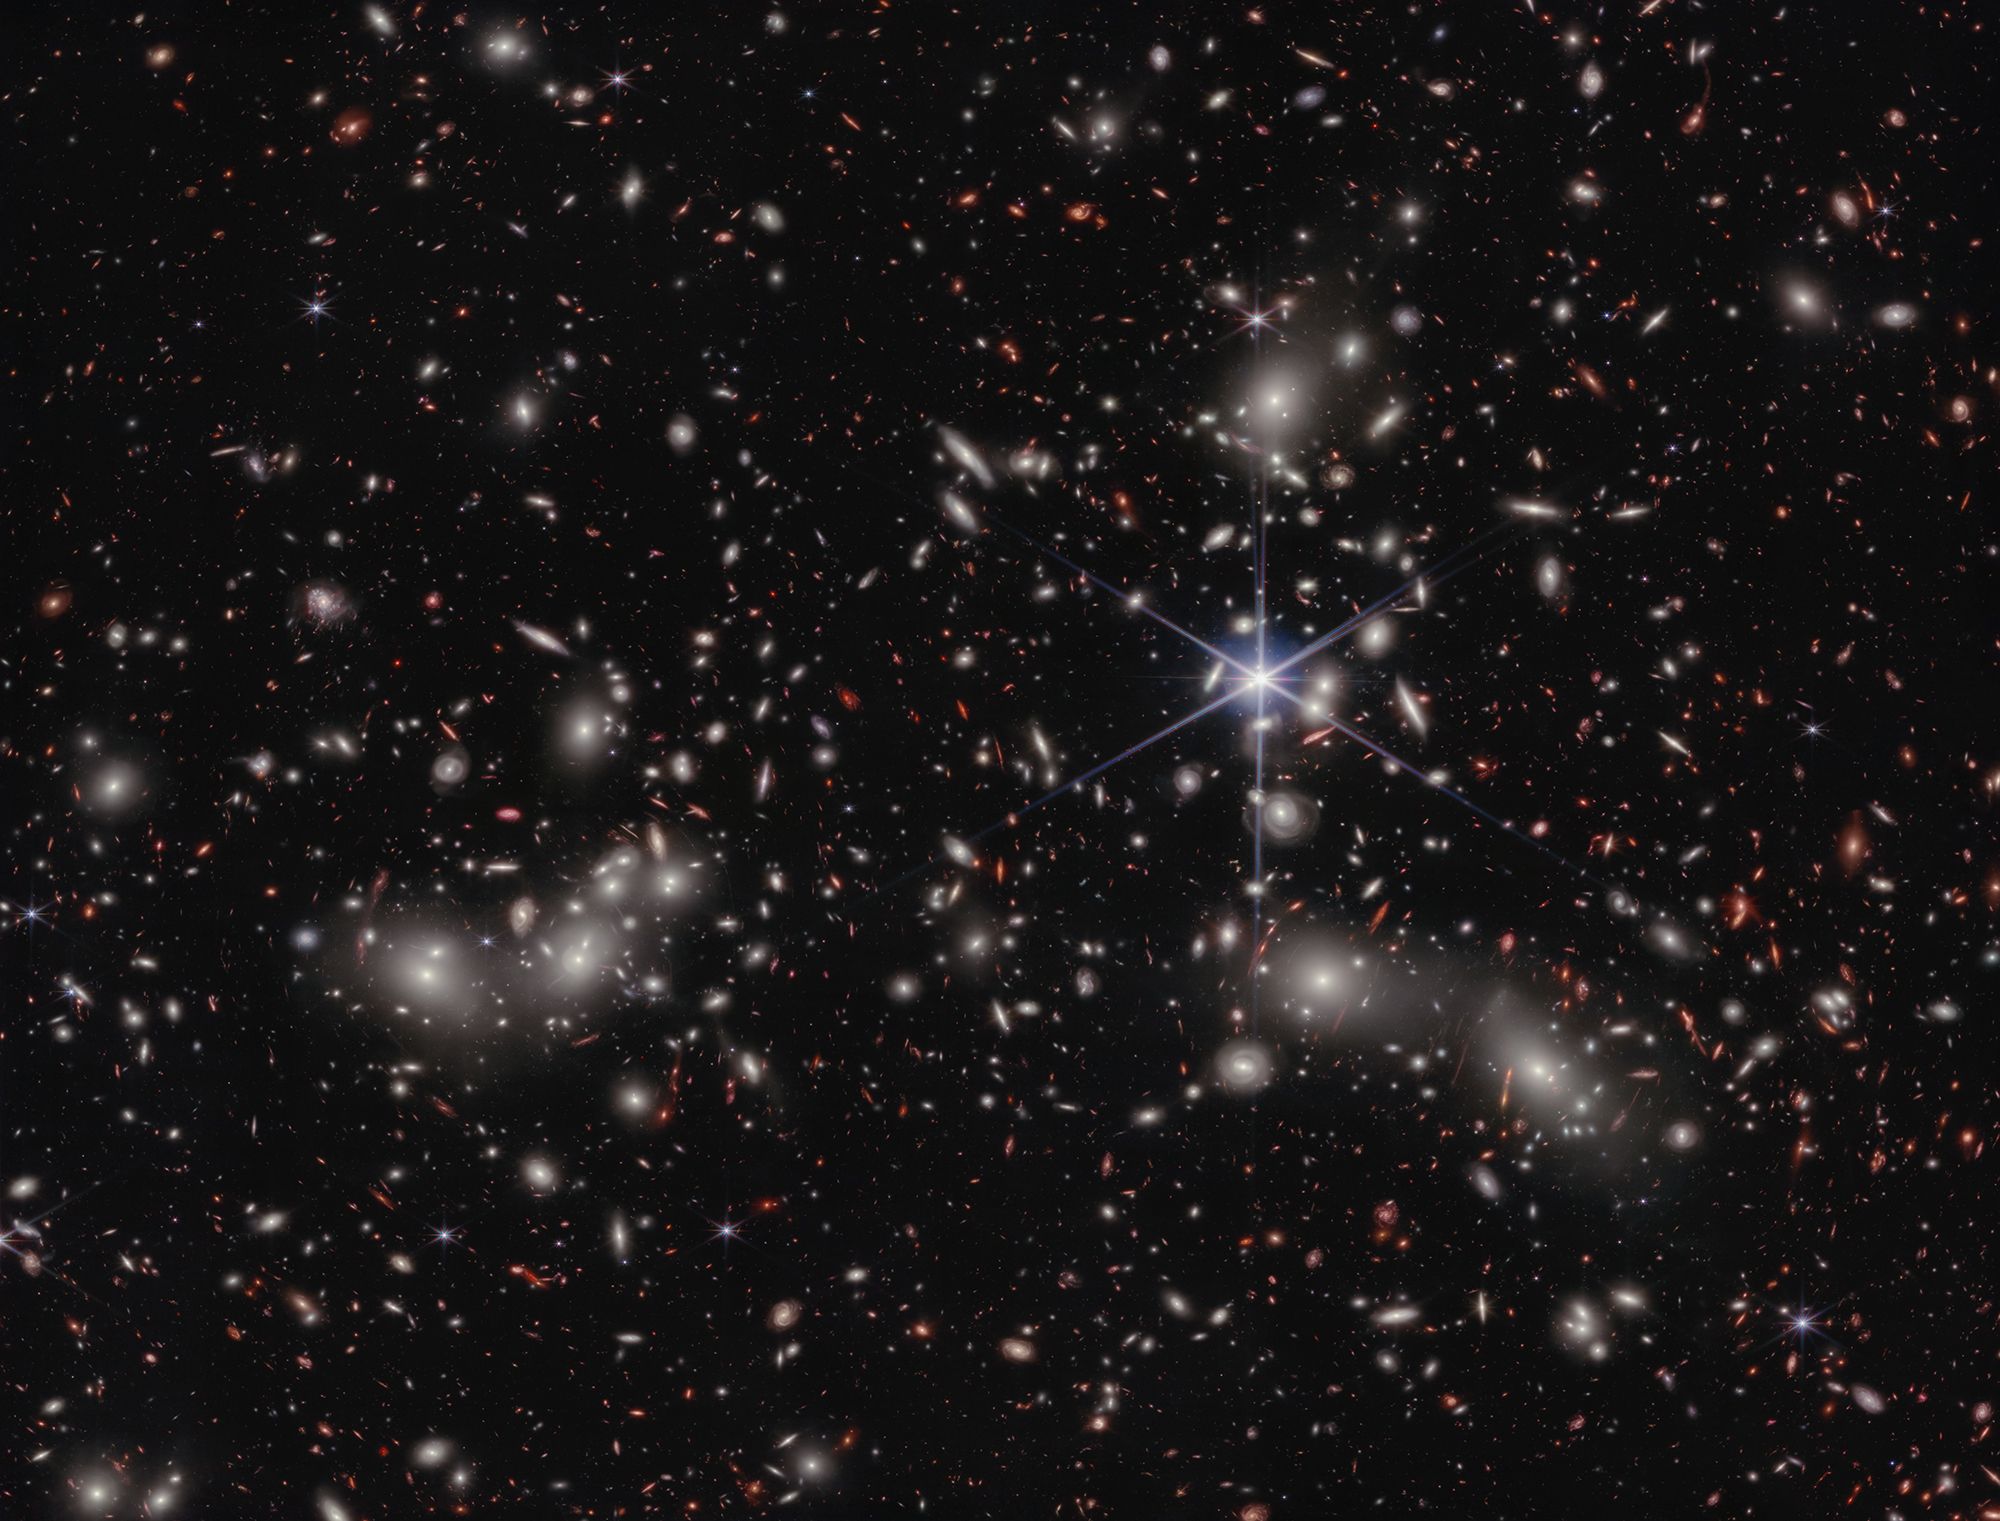 A foreground star to the right of the image centre, displays JWST’s distinctive diffraction spikes. Bright white sources surrounded by a hazy glow are the galaxies of Pandora’s Cluster, a conglomeration of already-massive clusters of galaxies